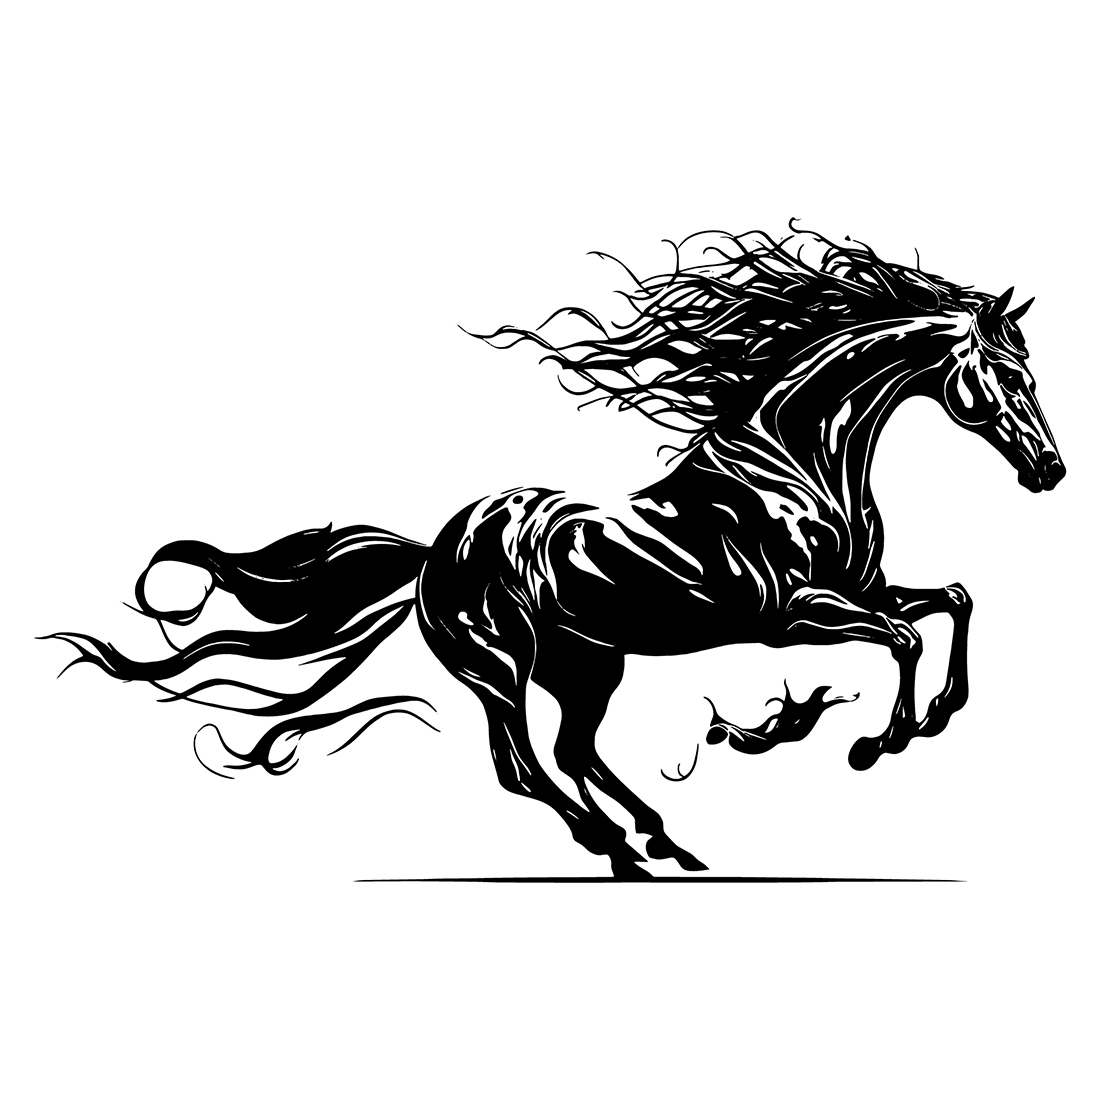 Black and white drawing of a running horse.